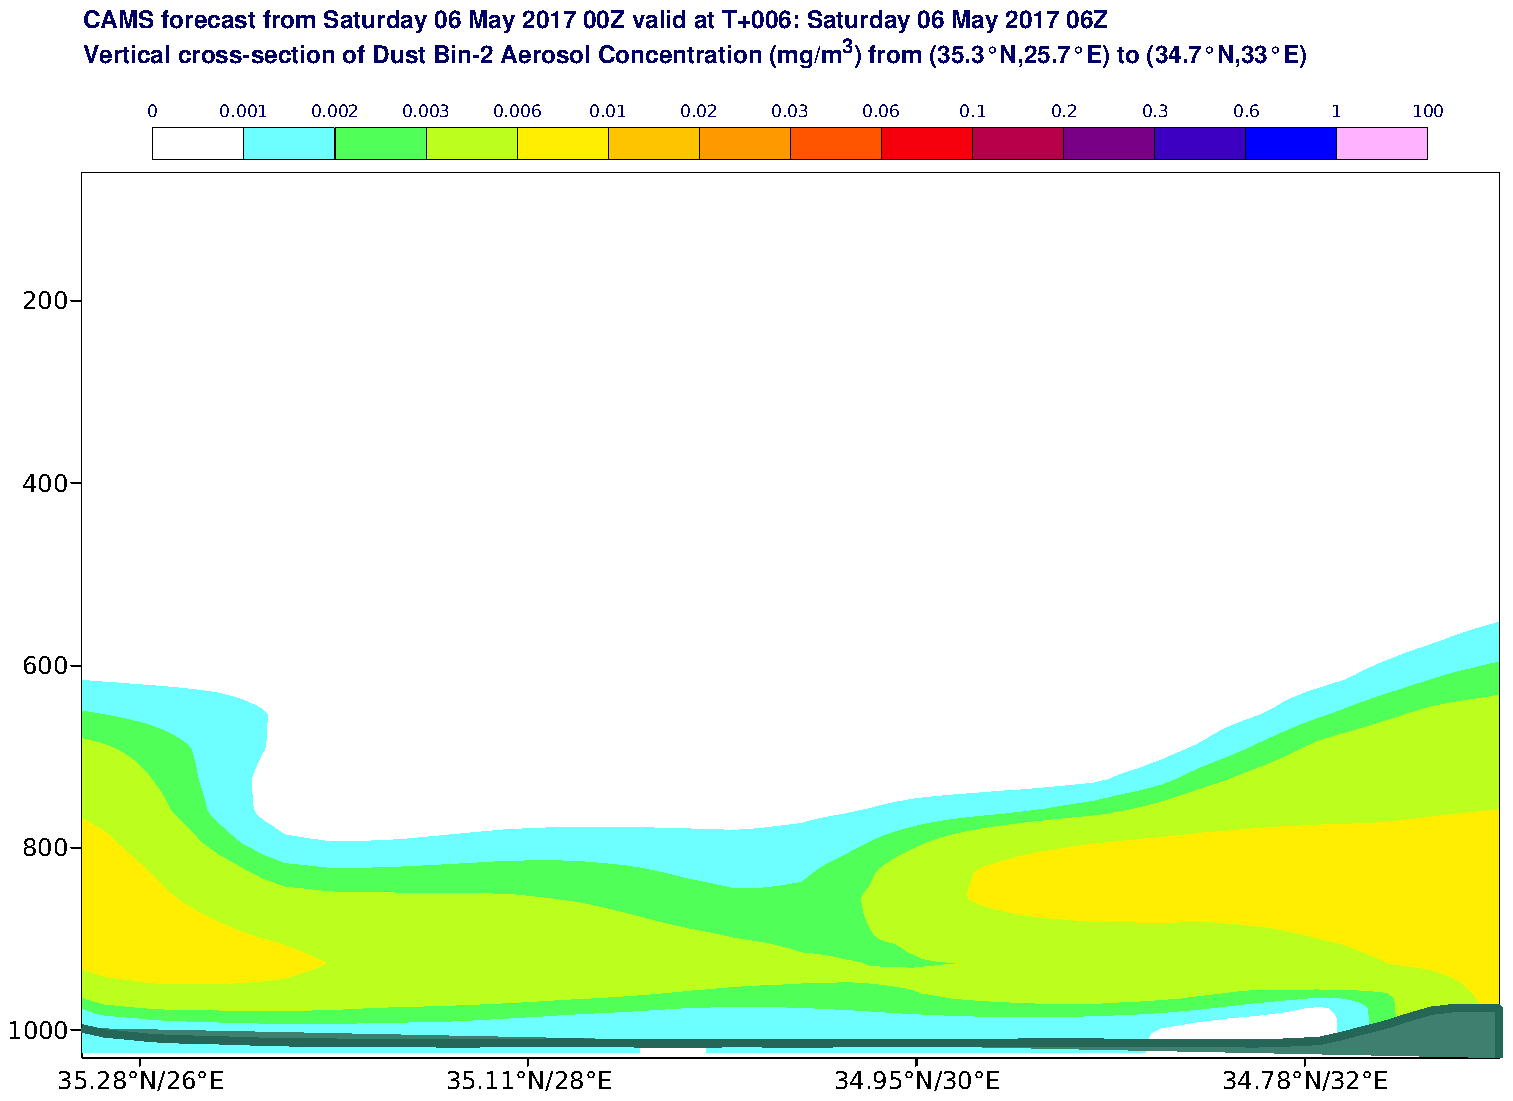 Vertical cross-section of Dust Bin-2 Aerosol Concentration (mg/m3) valid at T6 - 2017-05-06 06:00